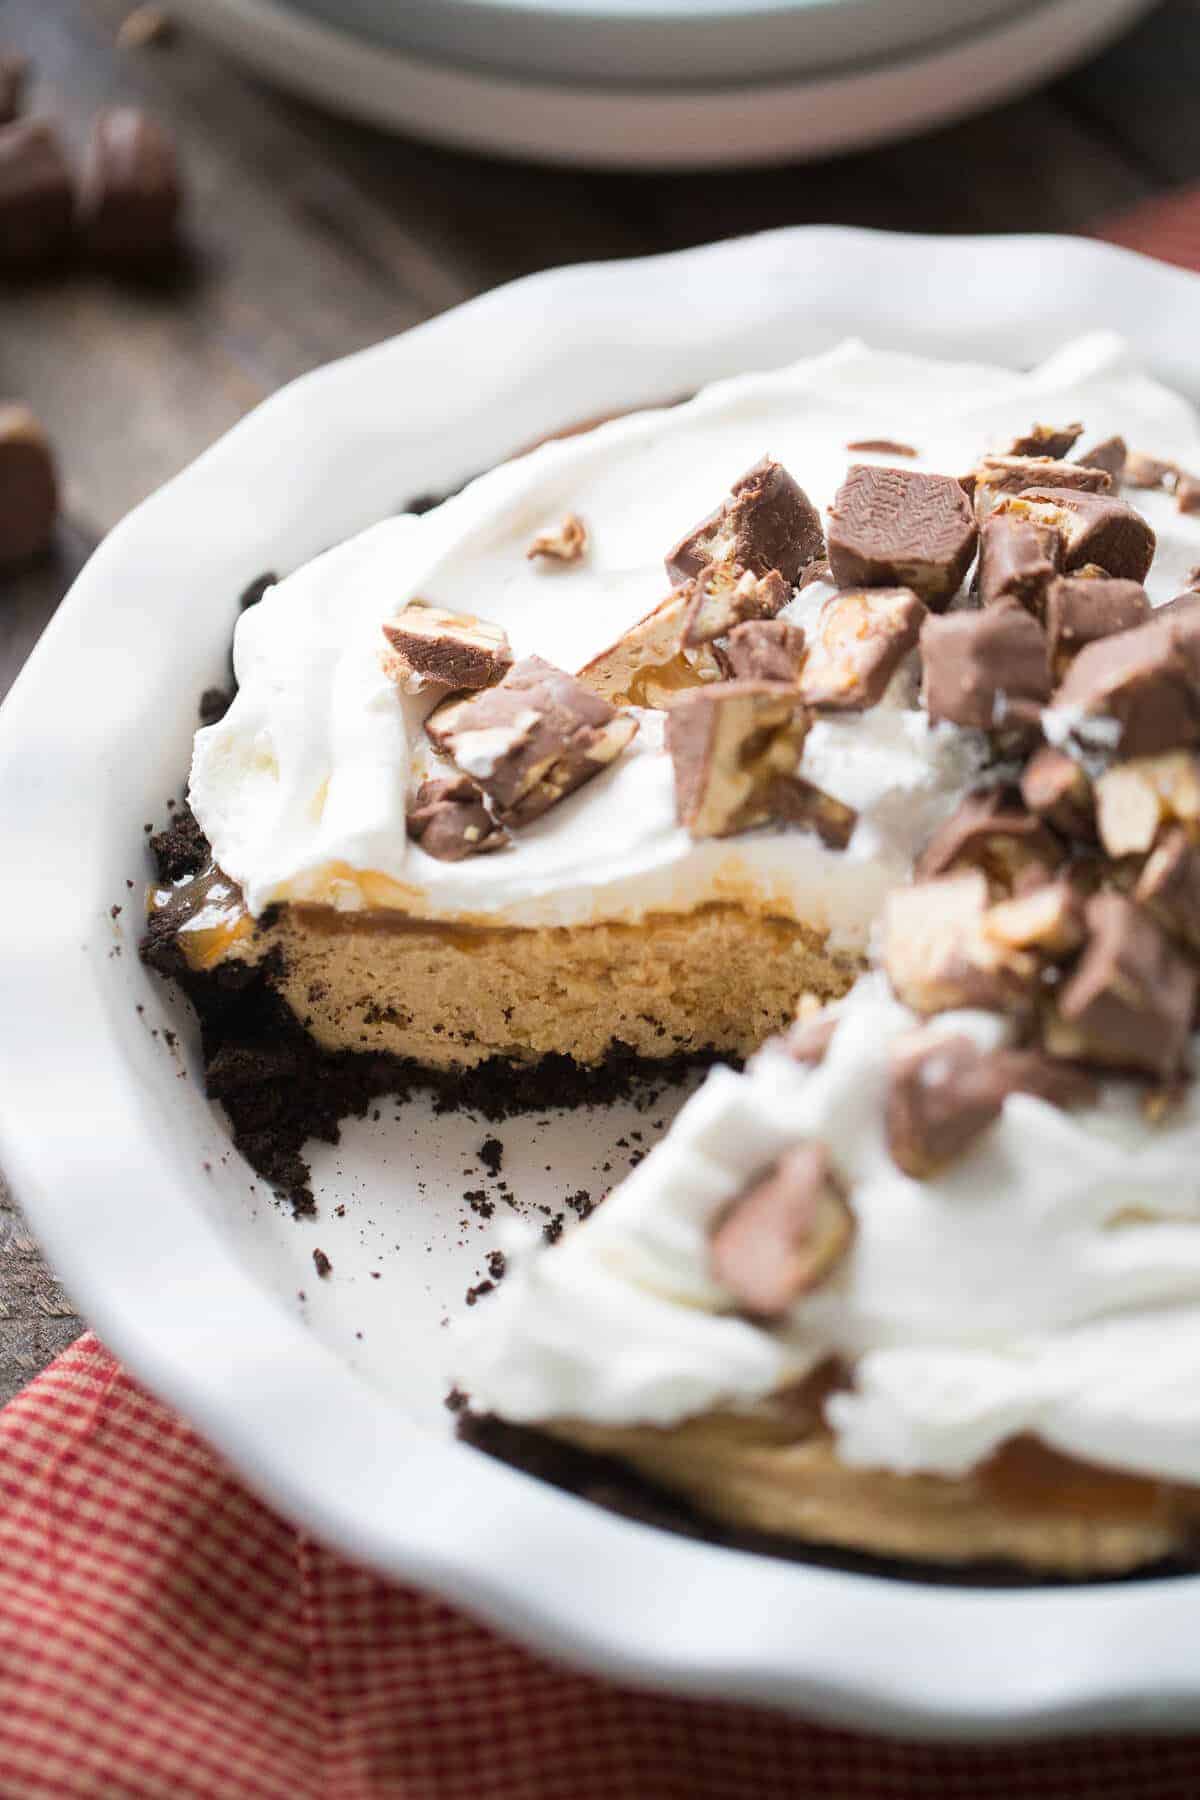 This peanut butter pie is creamy and smooth and has a touch of caramel!